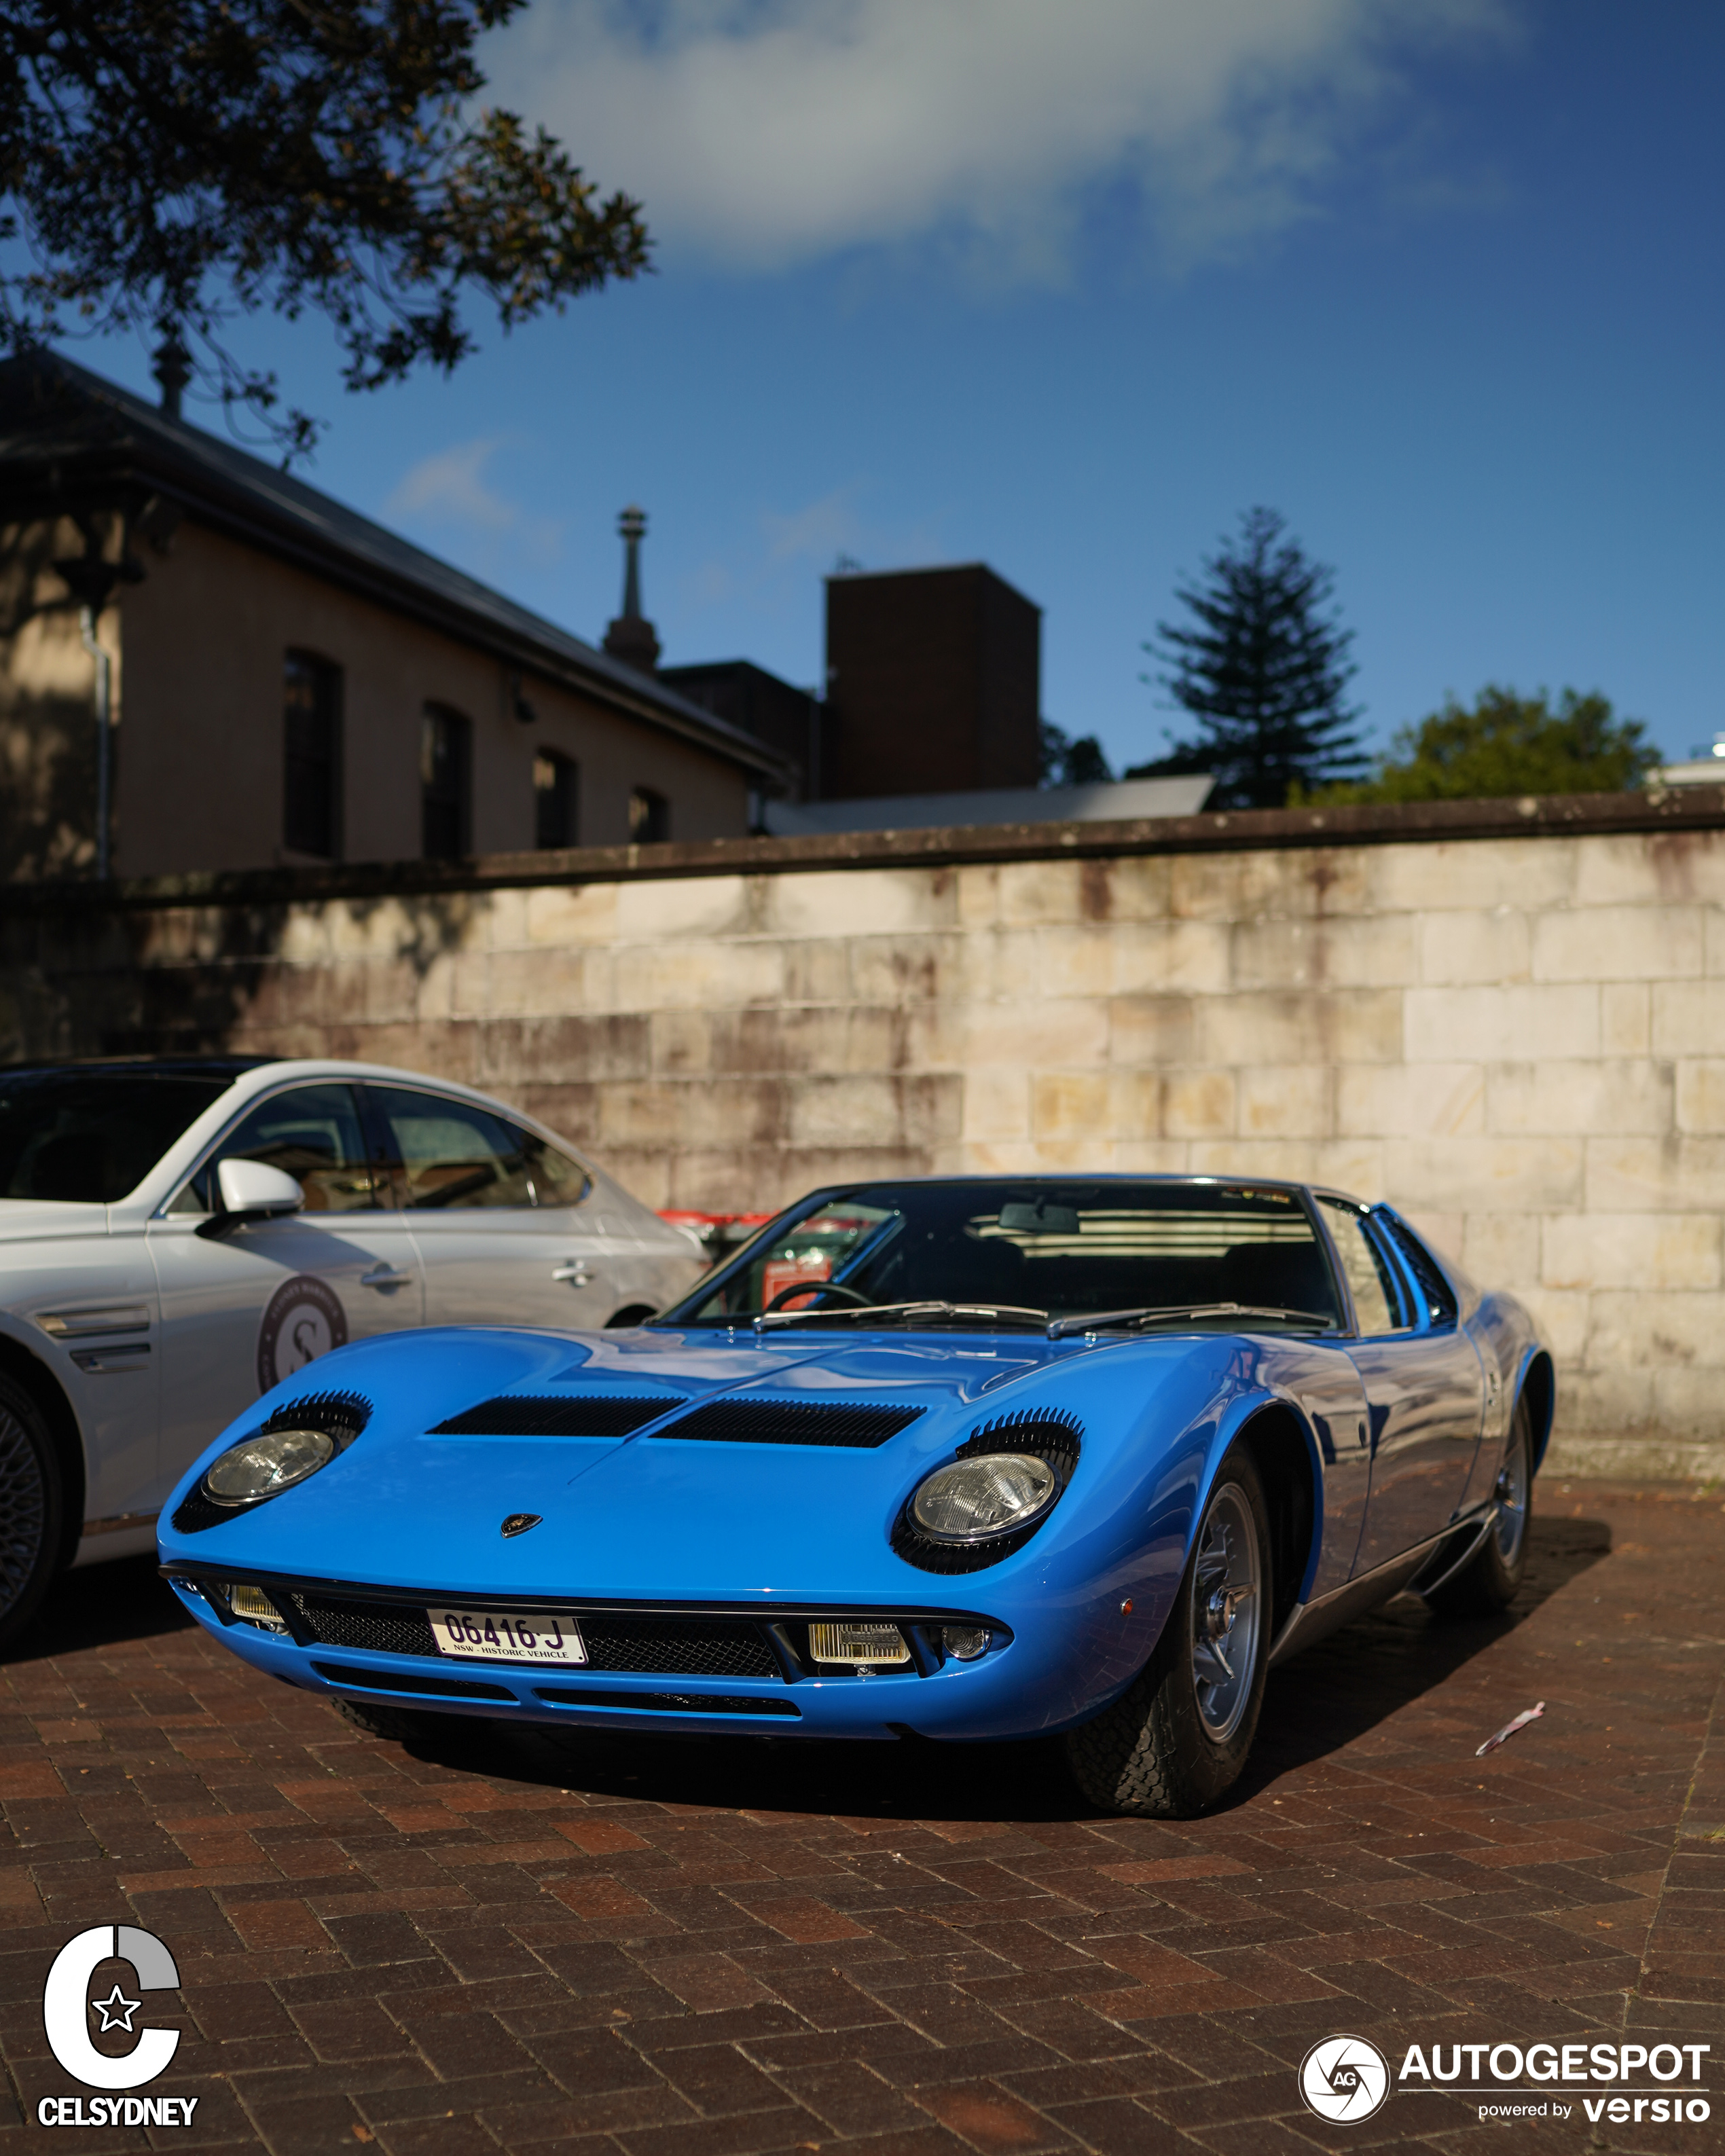 A blue Miura shows up in Sydney